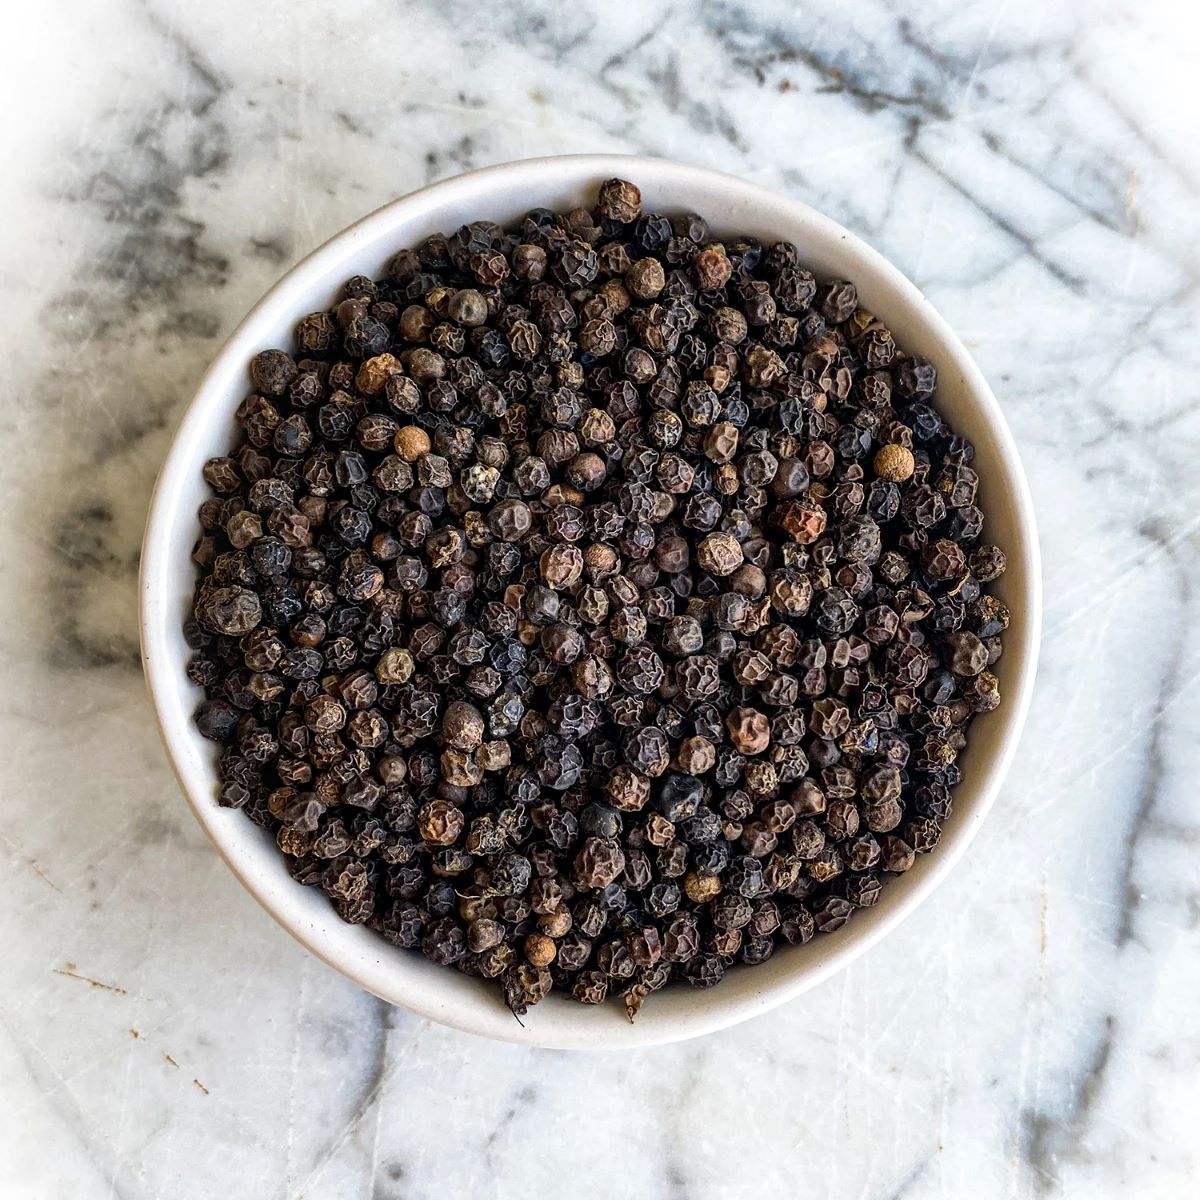 How To Store Peppercorns